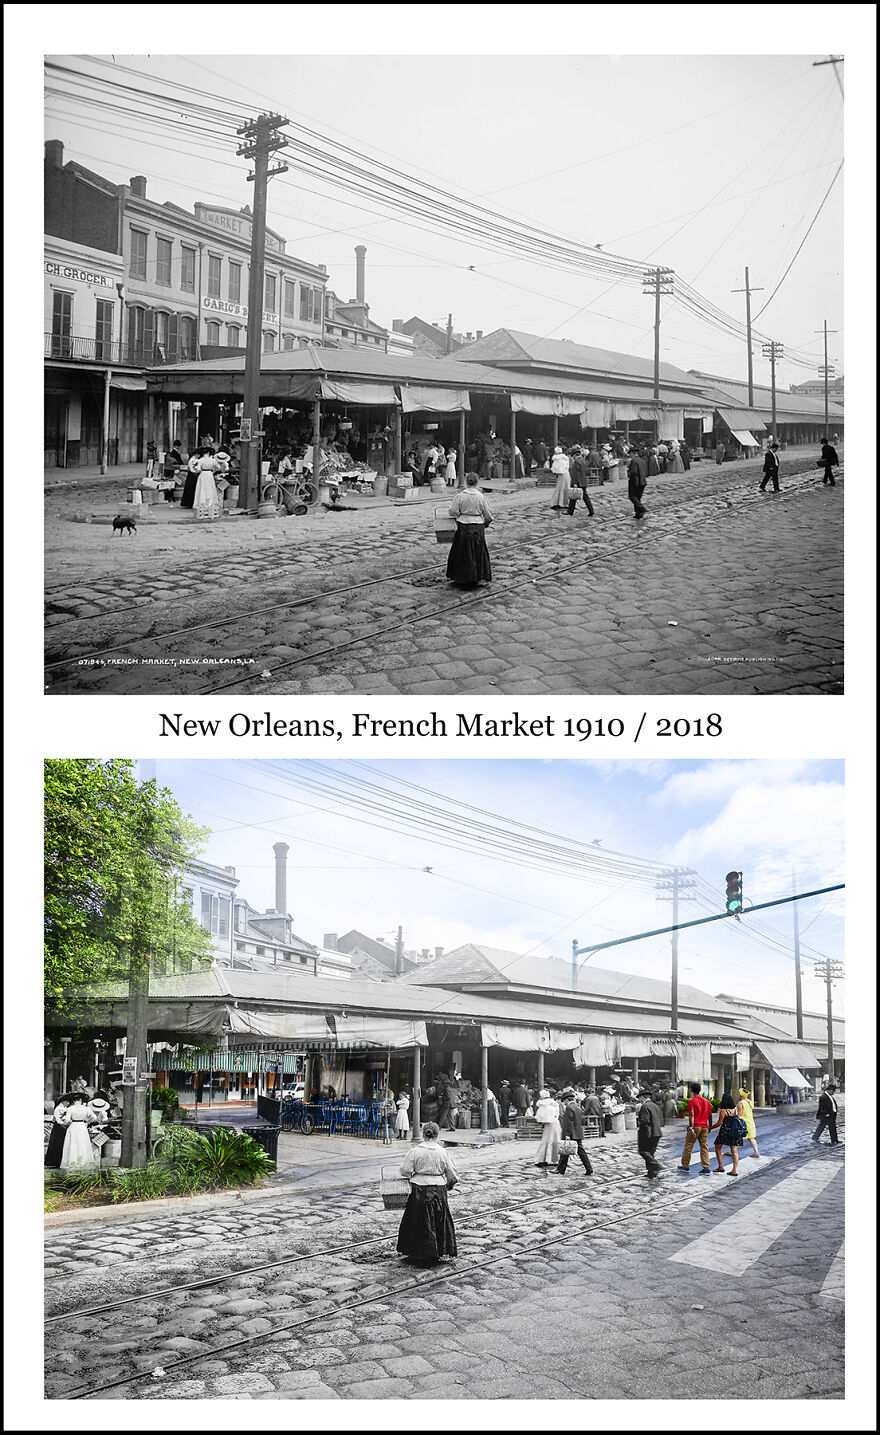 New Orleans, French Market 1910 / 2018